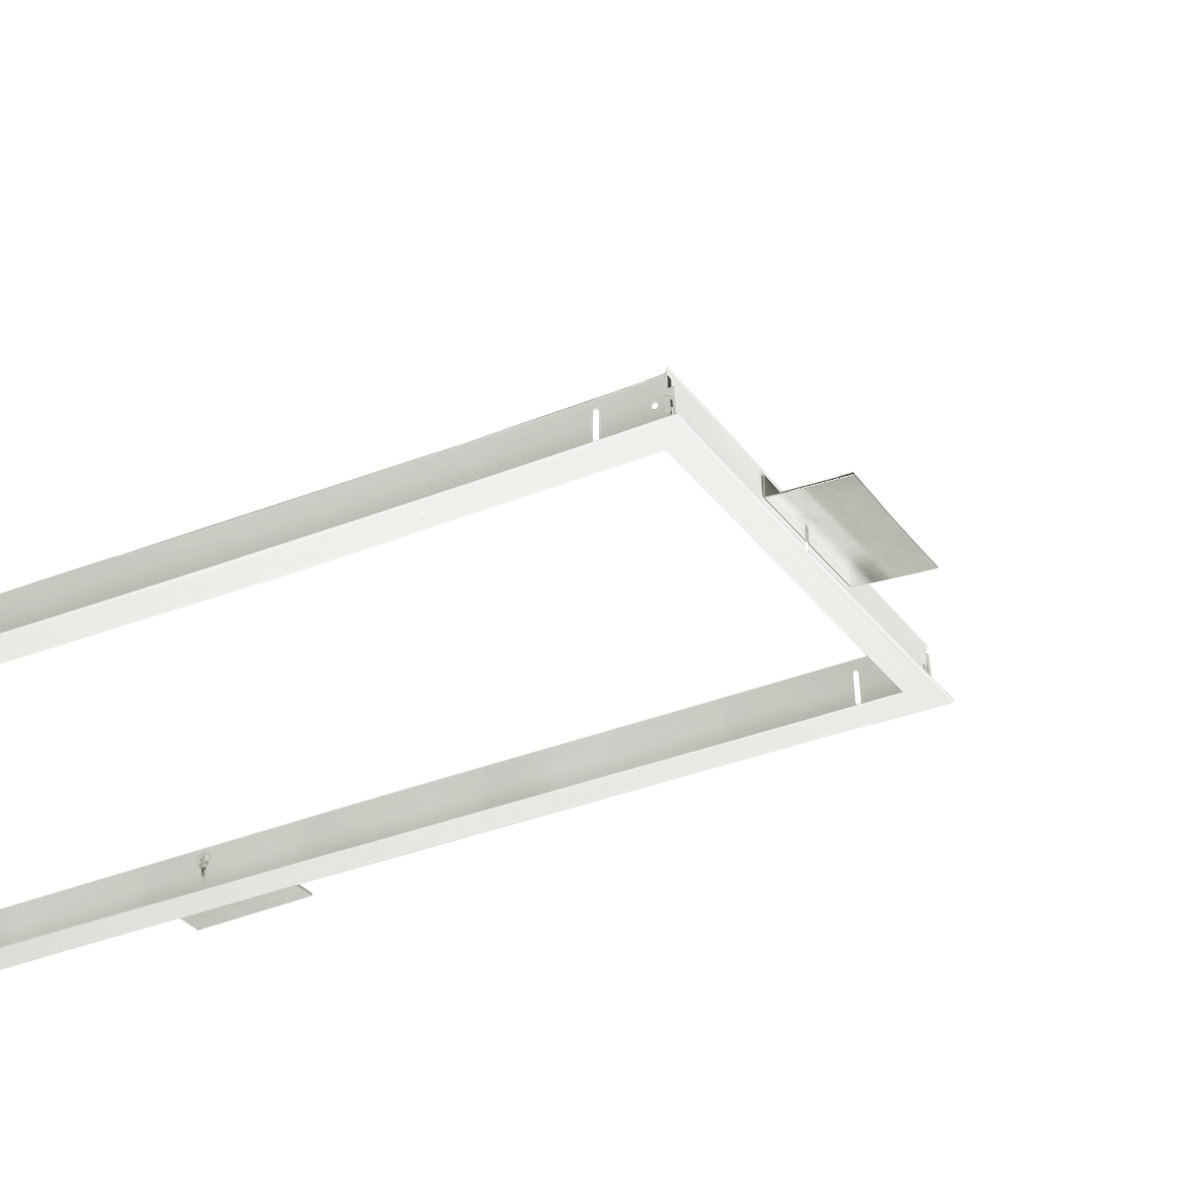 RECESSED FRAME UNIVERSAL 1200X300